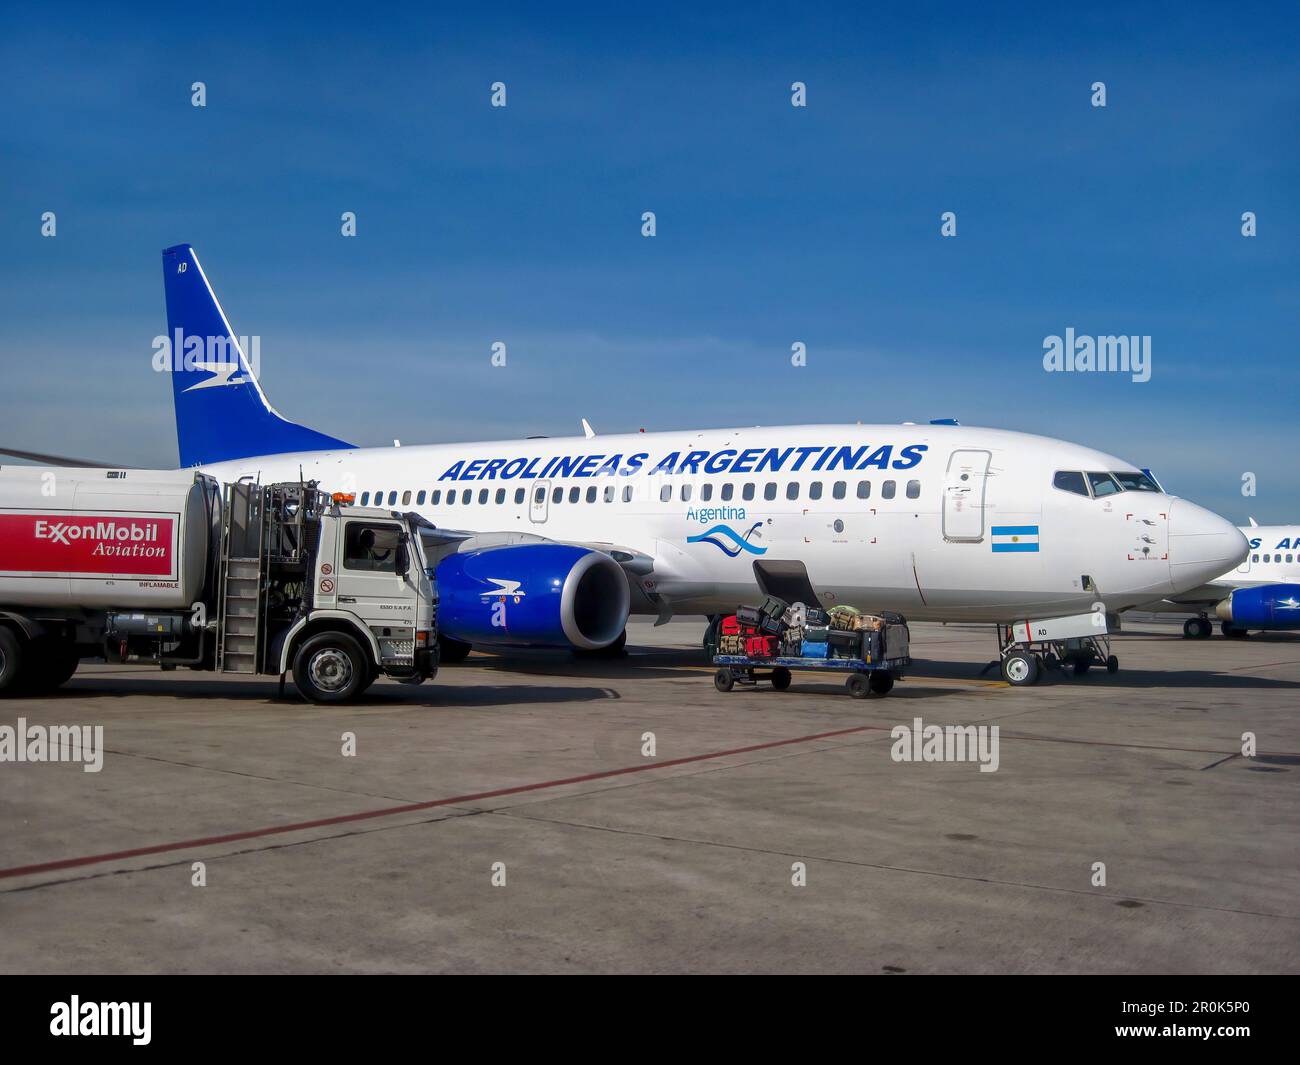 Buenos Aires, Argentina - Nov 19, 2010. An Aerolineas Argentinas passenger jet on the airport tarmac next to an ExxonMobil fuel truck and luggage cart Stock Photo